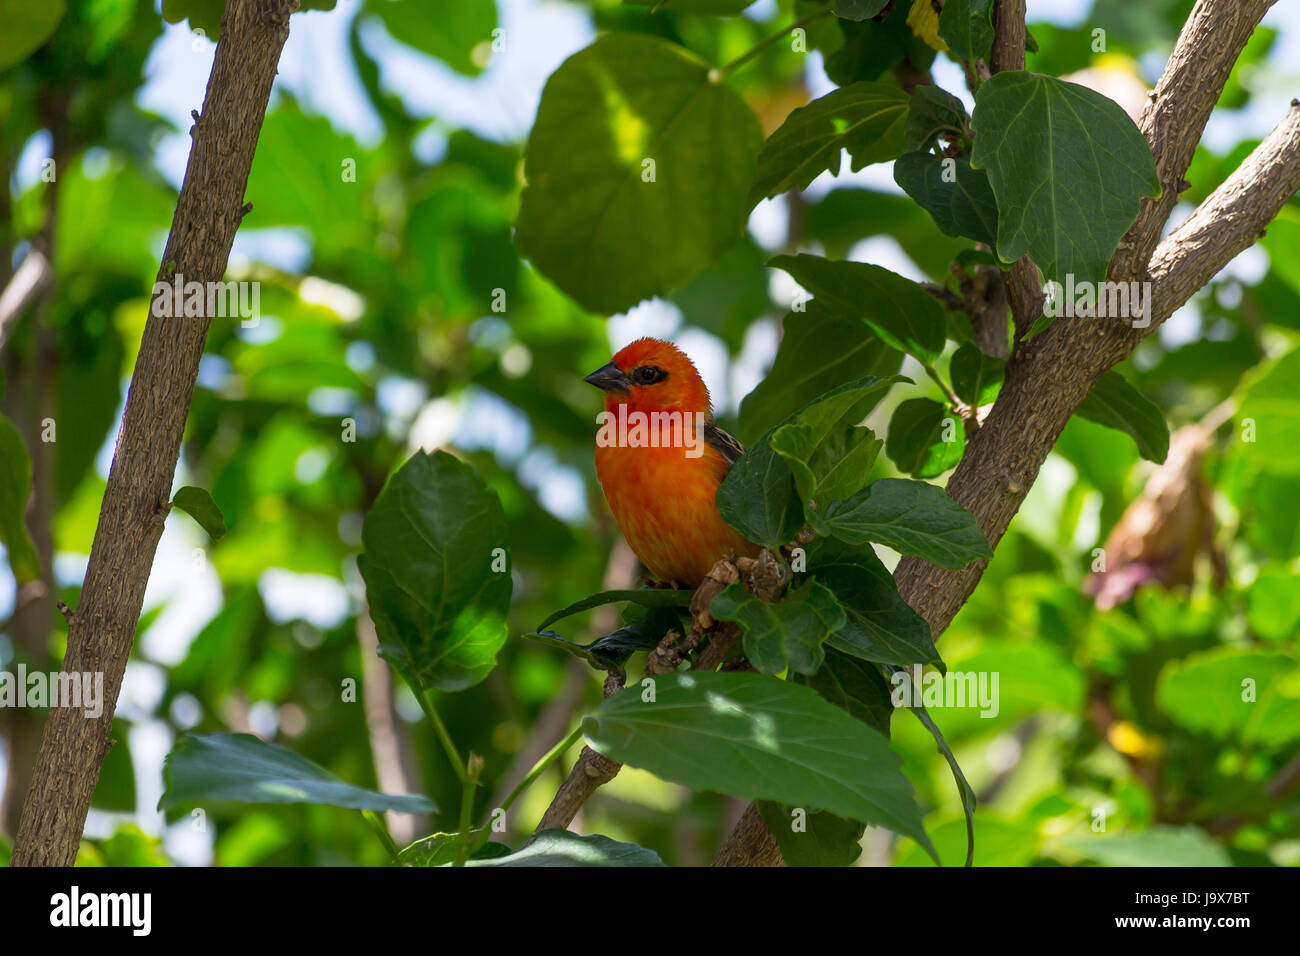 Little red fody bird spying Stock Photo